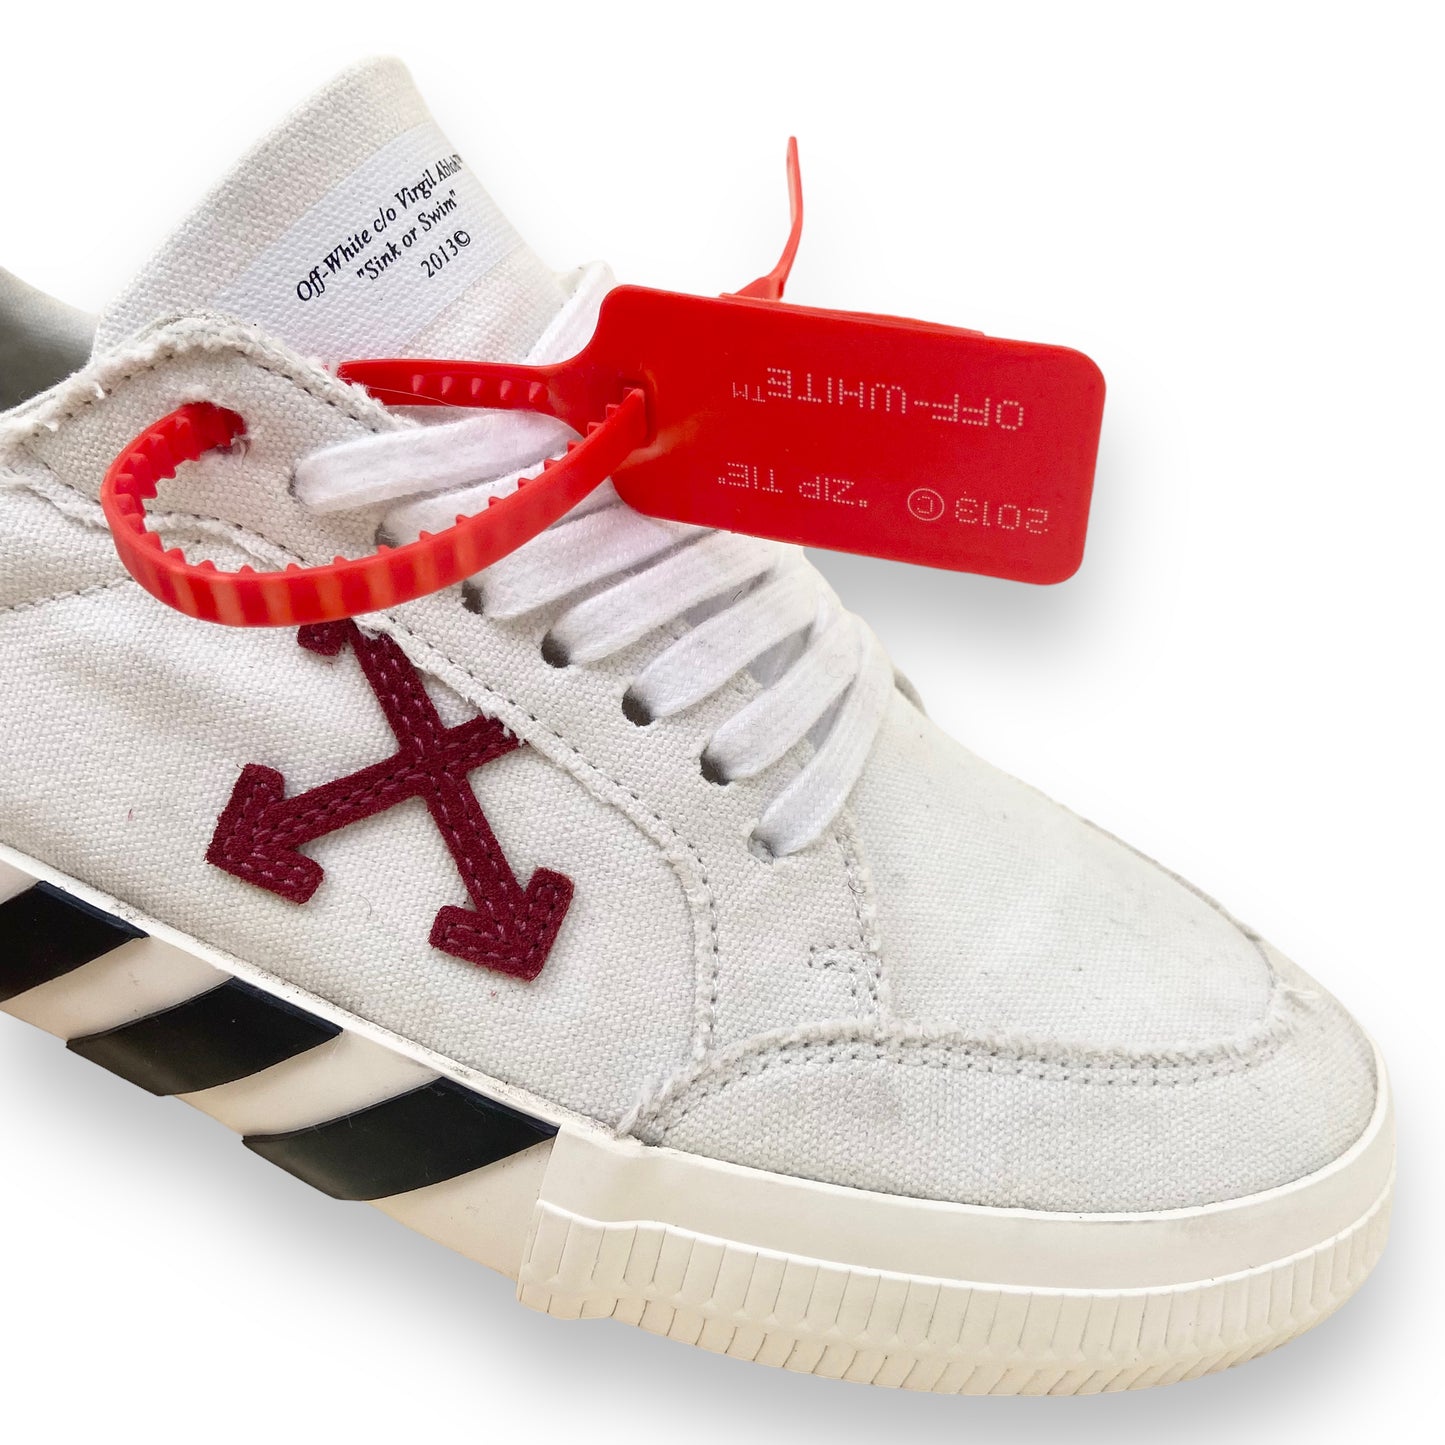 OFF-WHITE LOW TOP SNEAKERS WHITE UK7